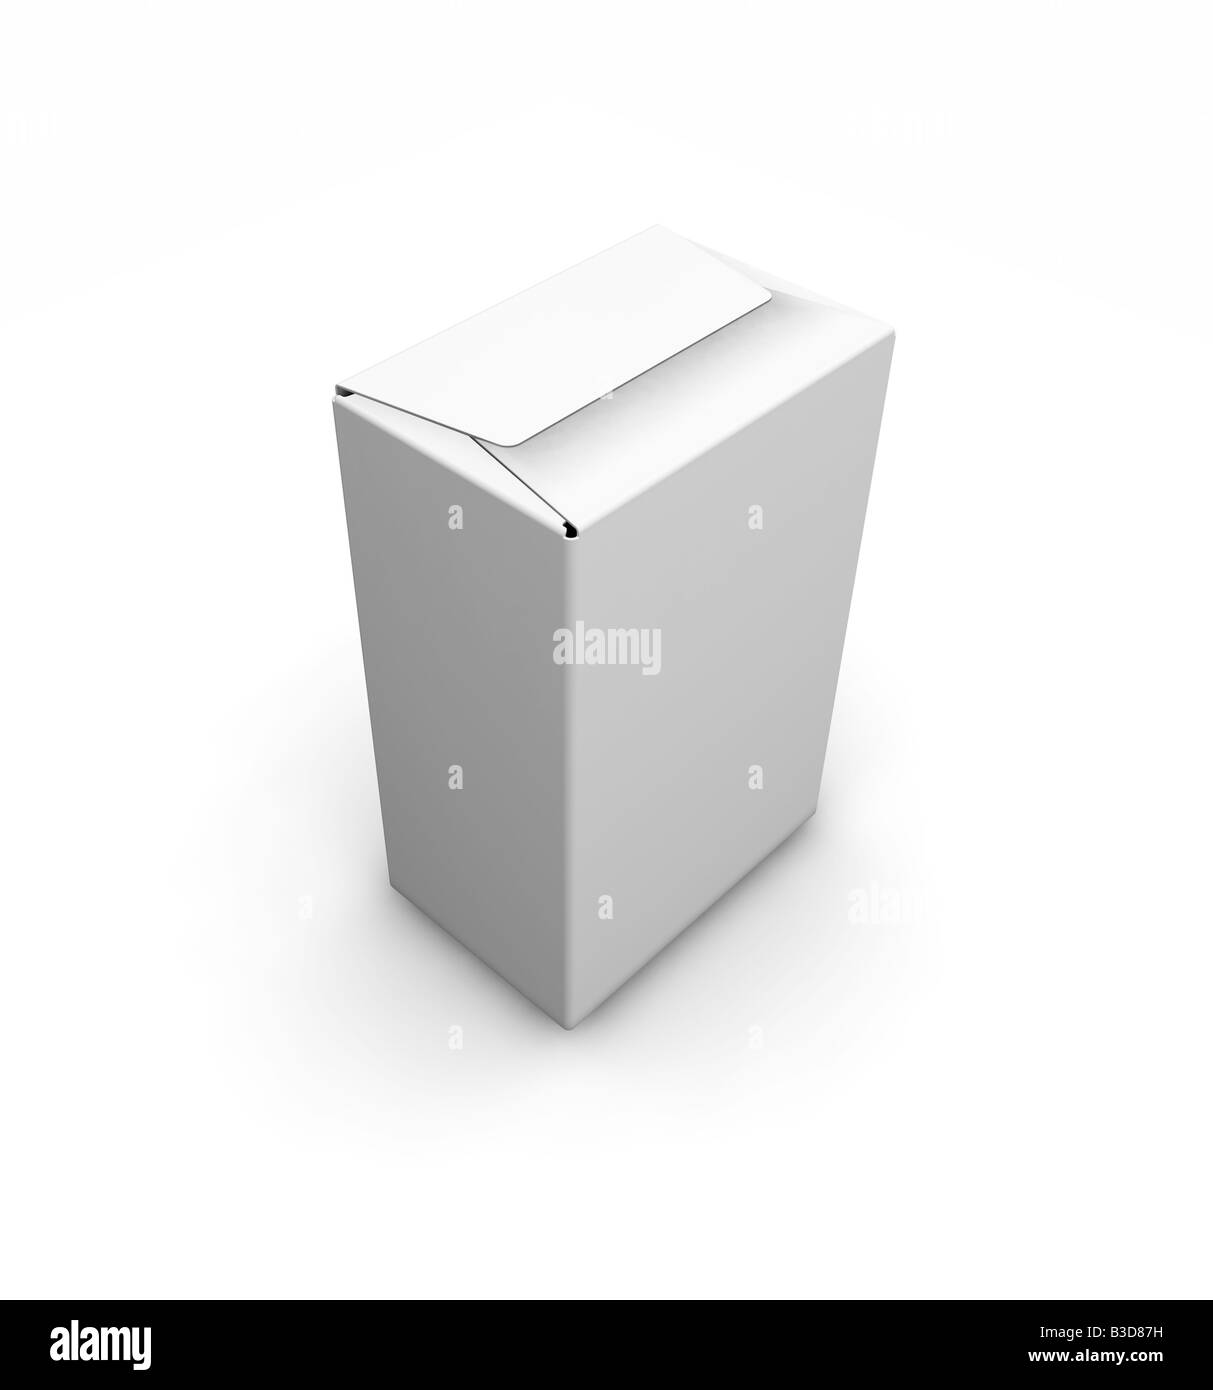 3D render of a blank white box Stock Photo